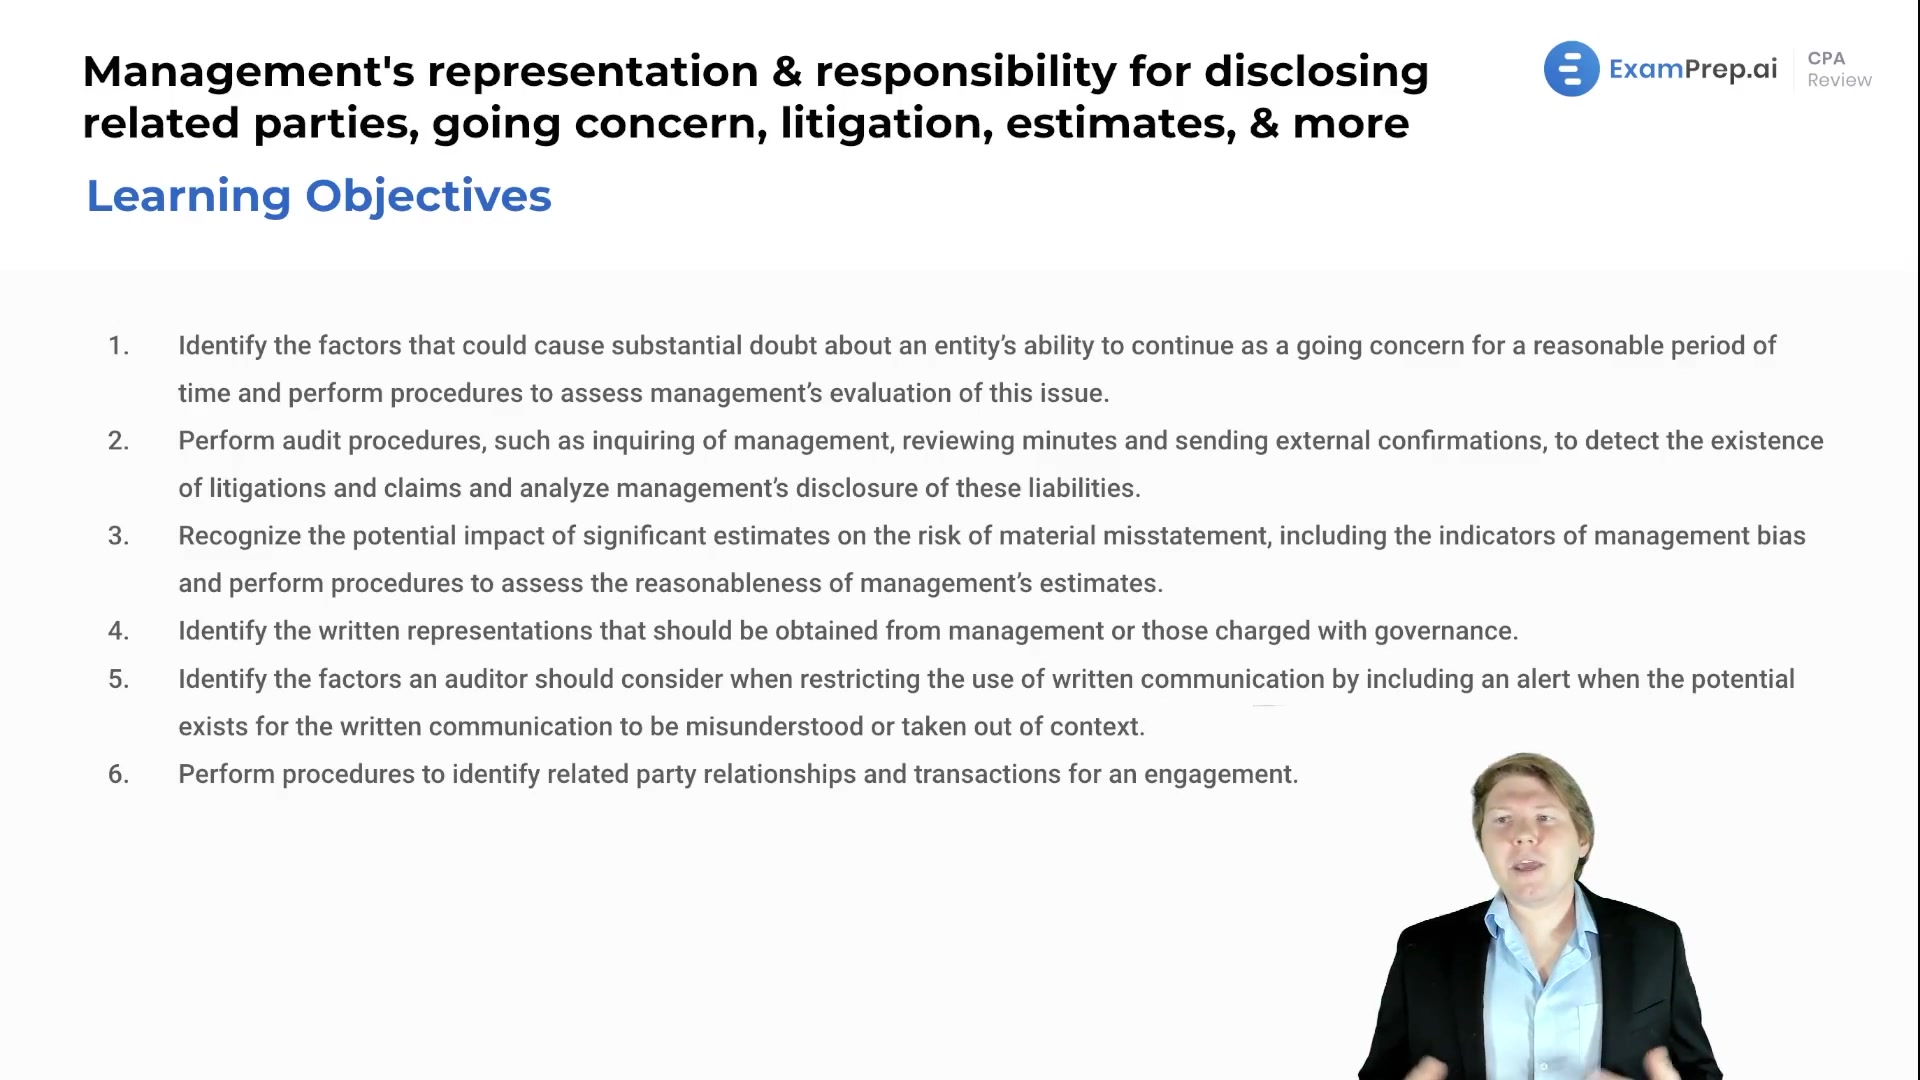 Management's Responsibility for Disclosing Related Parties, Going Concern, Litigation, Estimates, & More Objectives lesson thumbnail